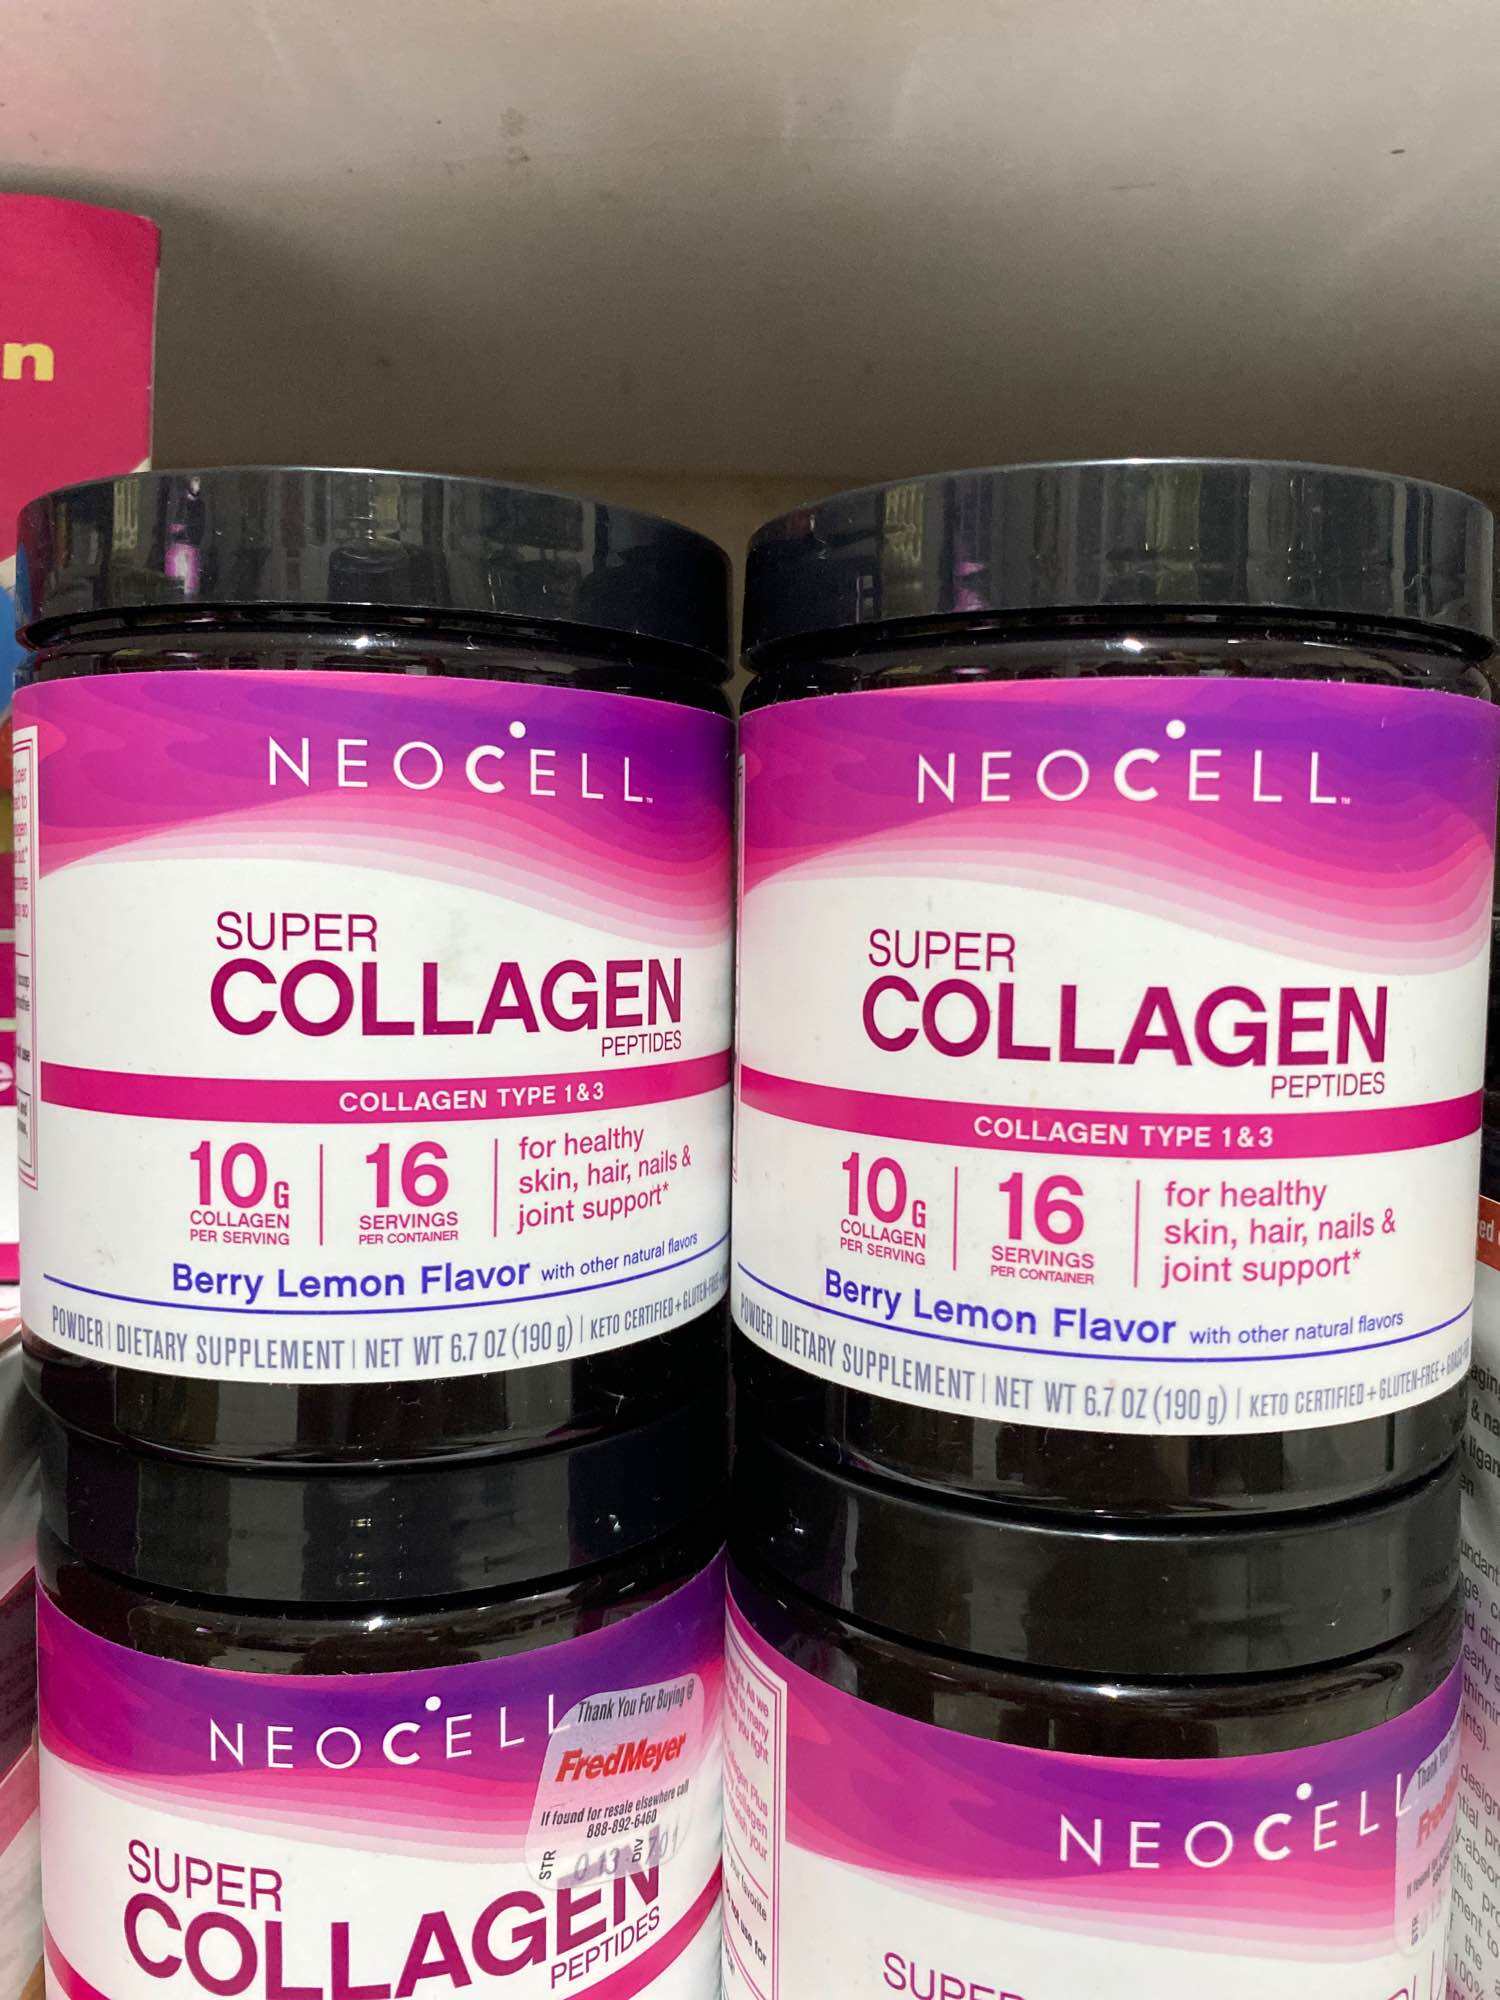 SALE DATE 8 24 Bột Super Collagen Neocell Peptides Type 1&3 vị Berry Lemon